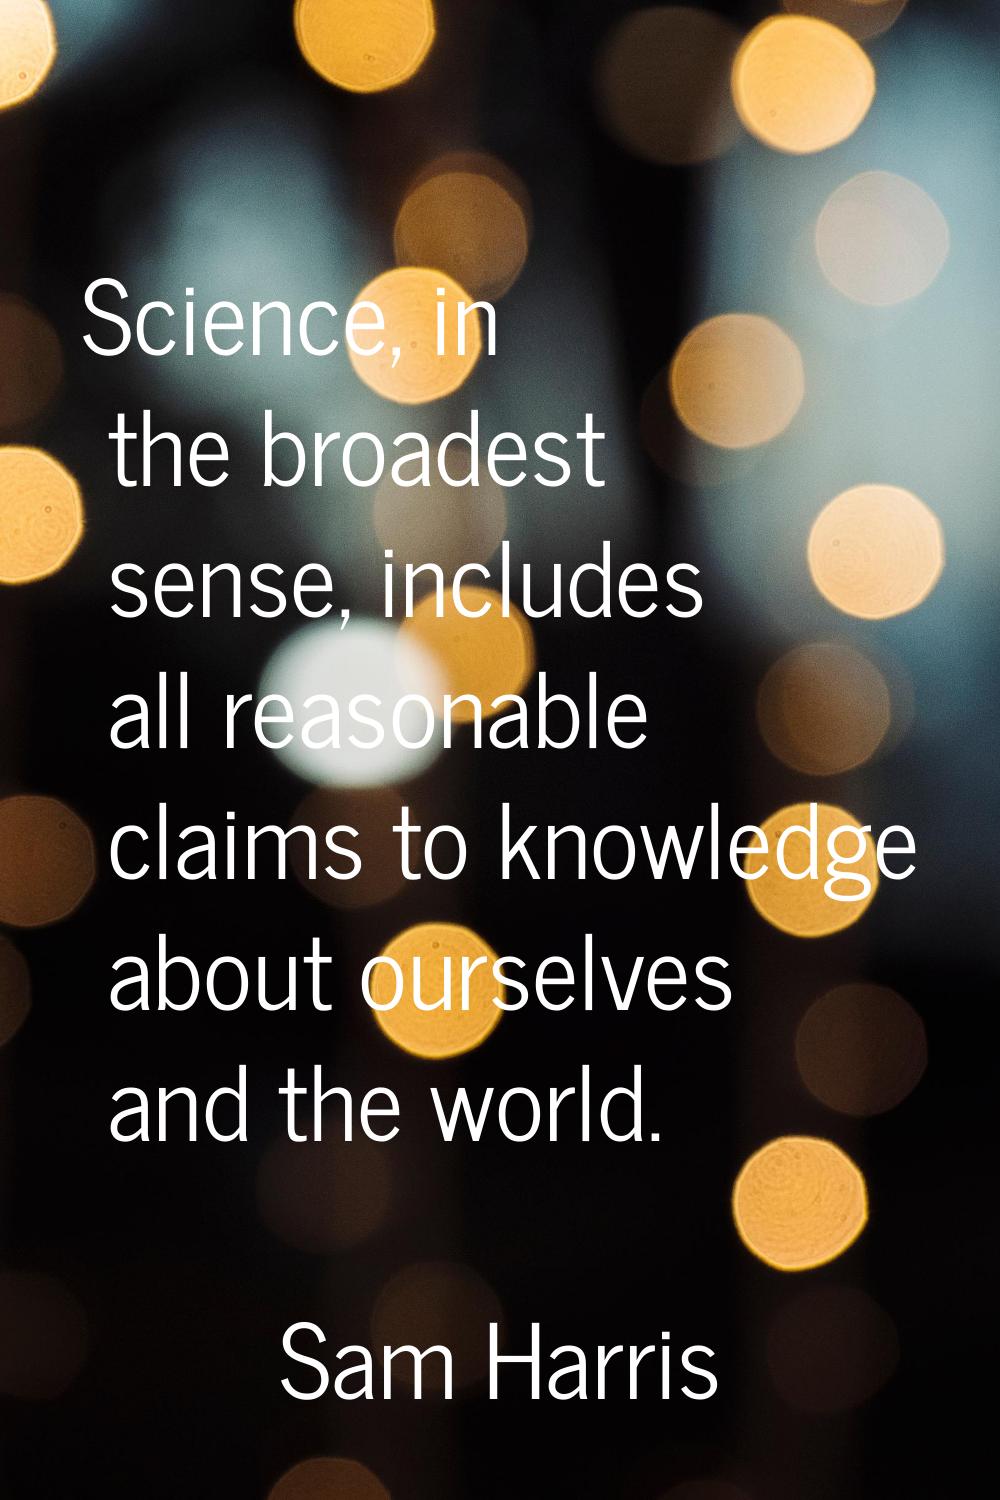 Science, in the broadest sense, includes all reasonable claims to knowledge about ourselves and the